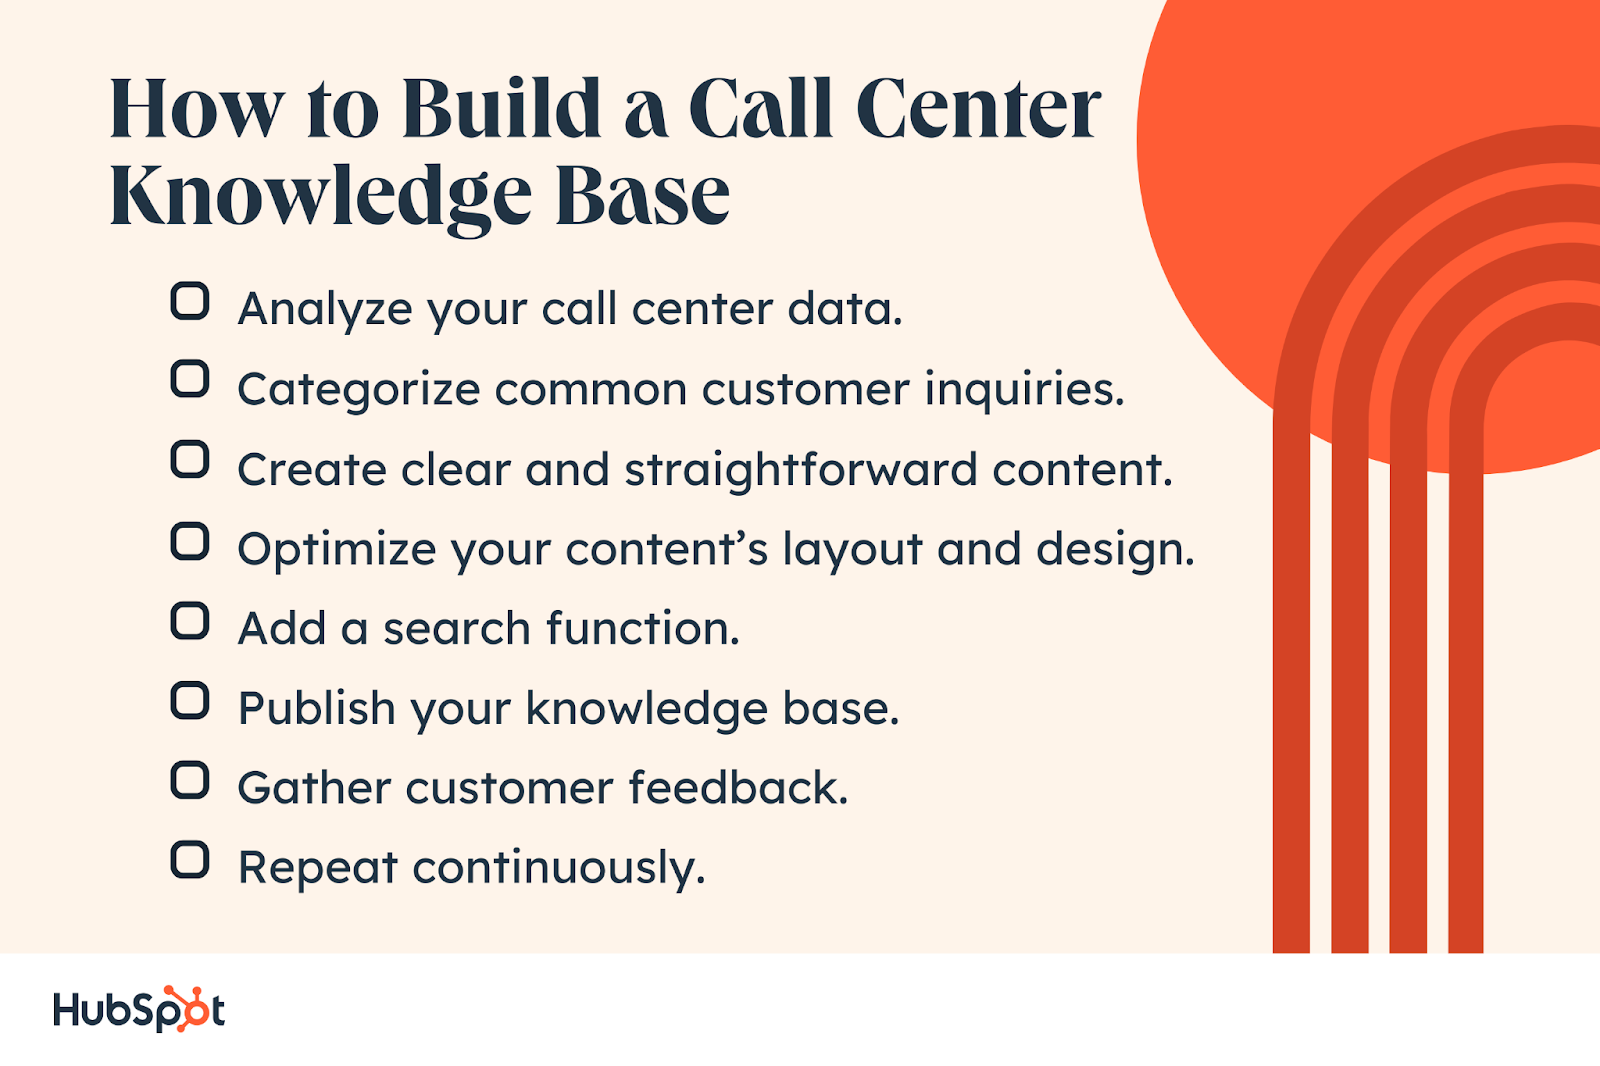 How to Build a Call Center Knowledge. BaseCreate clear and straightforward content. Analyze your call center data. Optimize your content’s layout and design. Categorize common customer inquiries. Add a search function. Publish your knowledge base. Gather customer feedback. Repeat continuously.